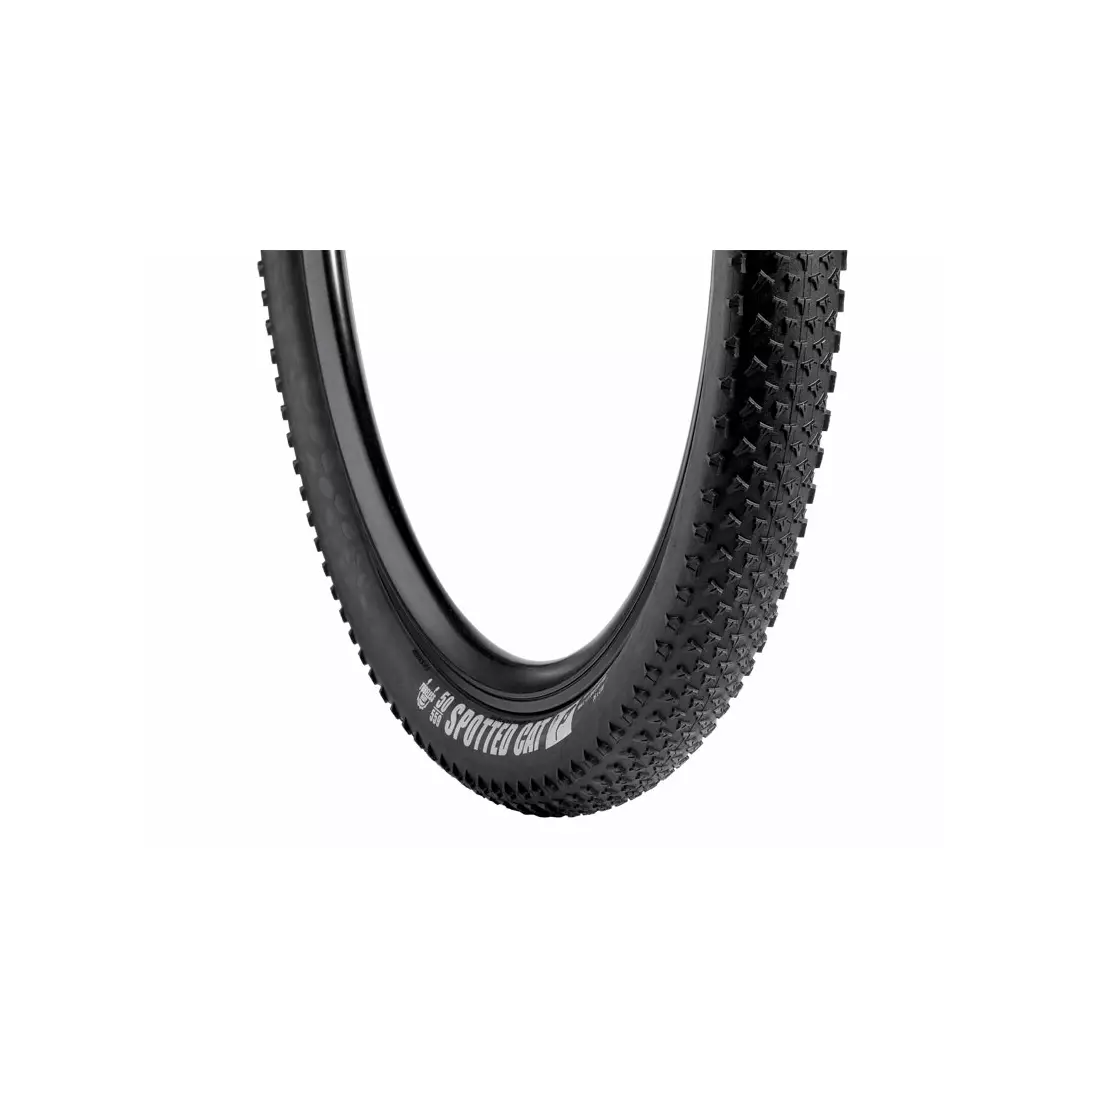 VREDESTEIN SPOTTED CAT Mtb bicycle tyre 27,5x2.00 (50-584) TUBELESS READY TPI120 540g black VRD-27304